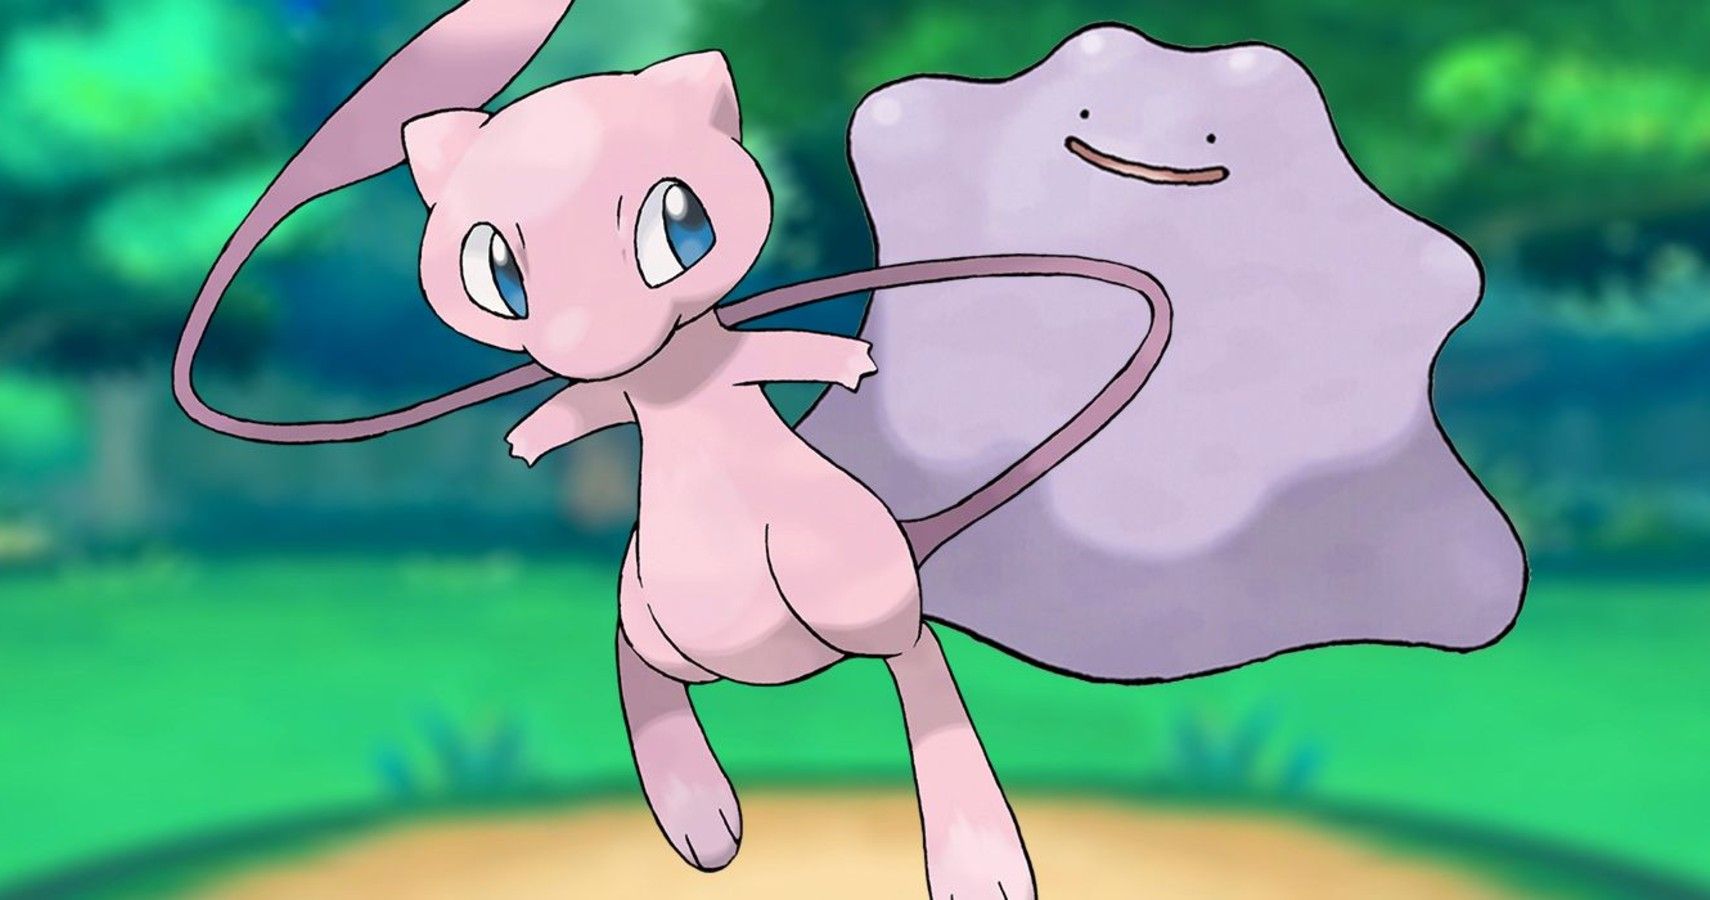 Will Shiny Mew Ever Be Released In Pokémon GO?